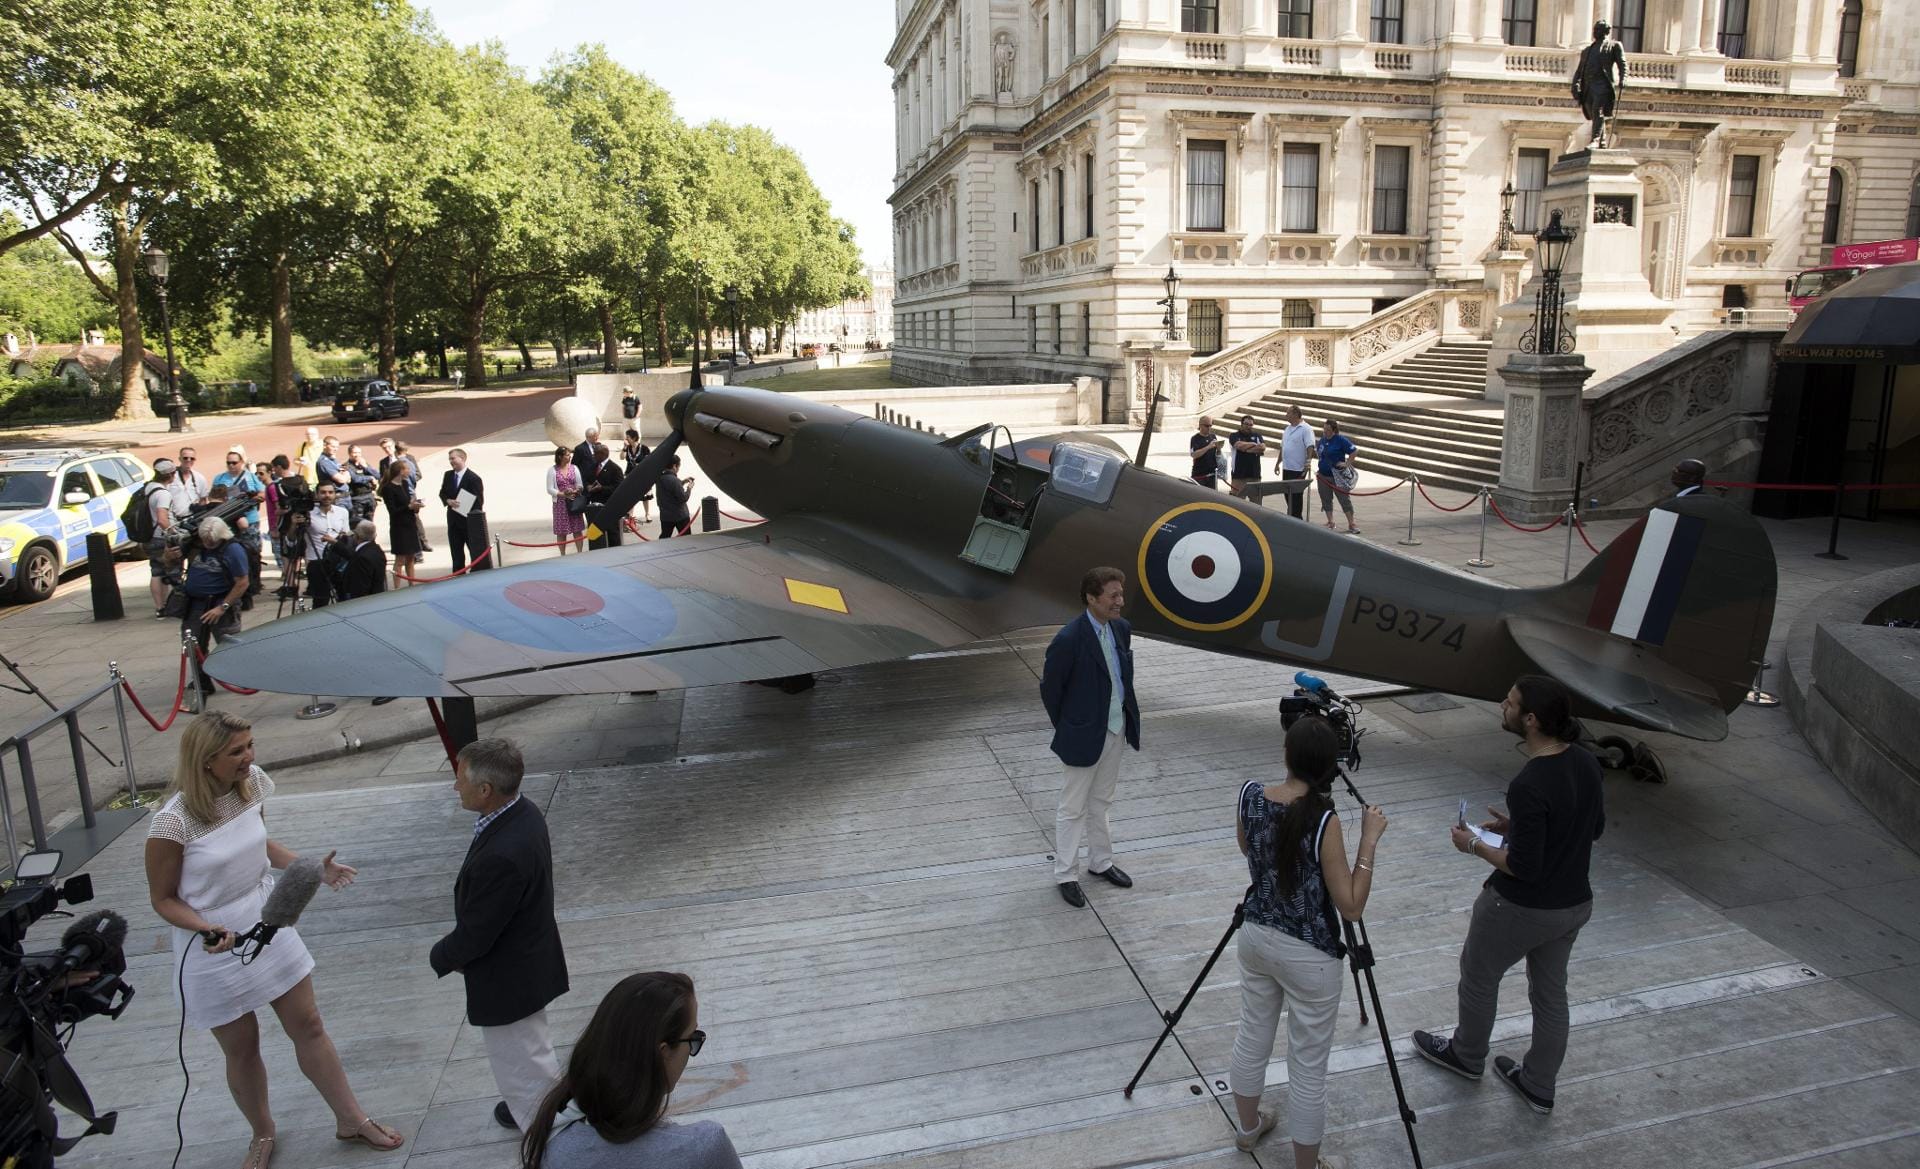 Christie's Spitfire aircraft auction to mark 75th anniversary of